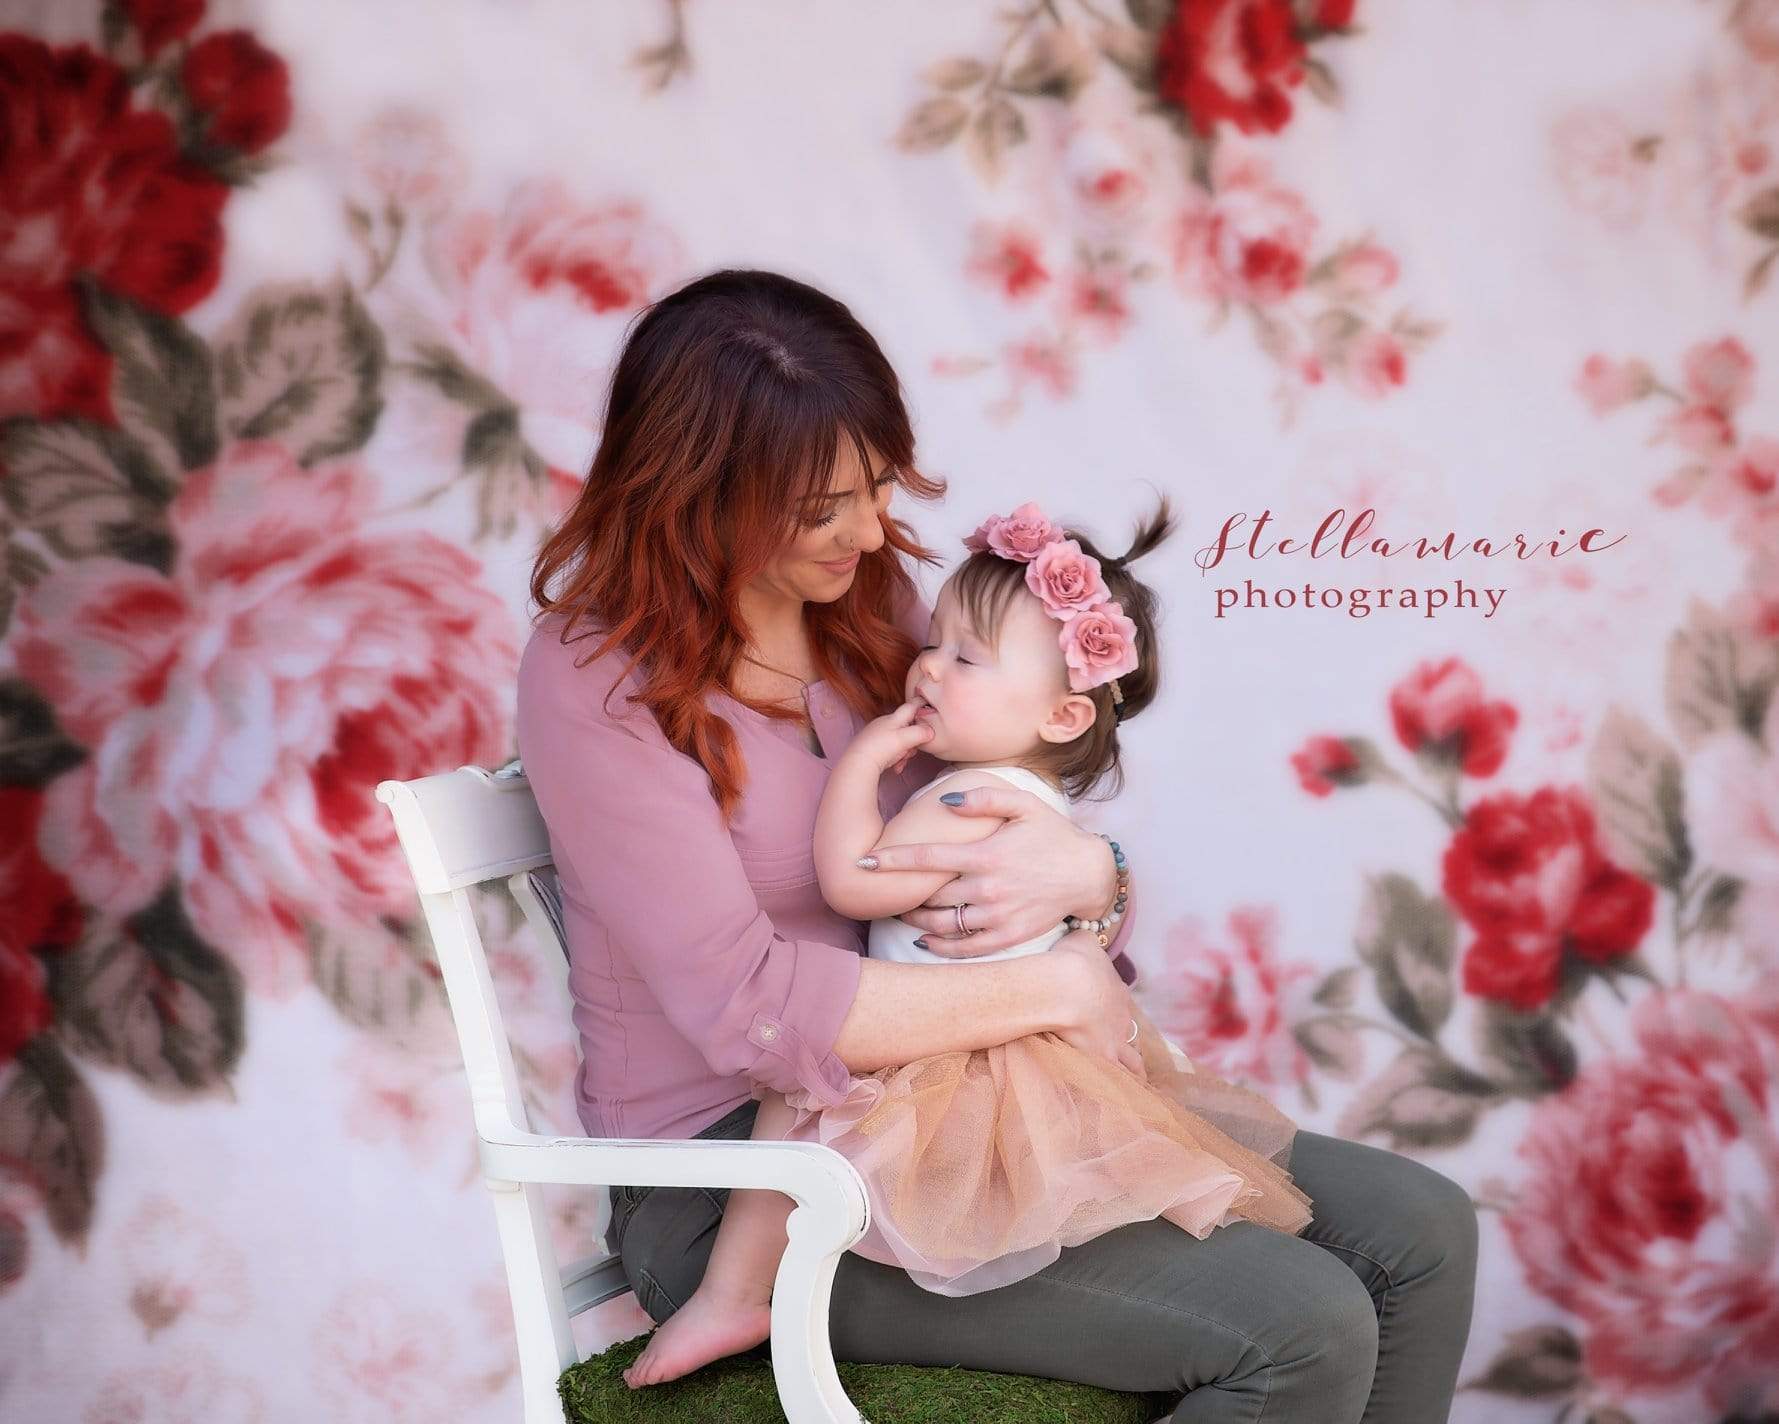 Kate Mother's Day Pattern Flower Backdrop for Photography Style